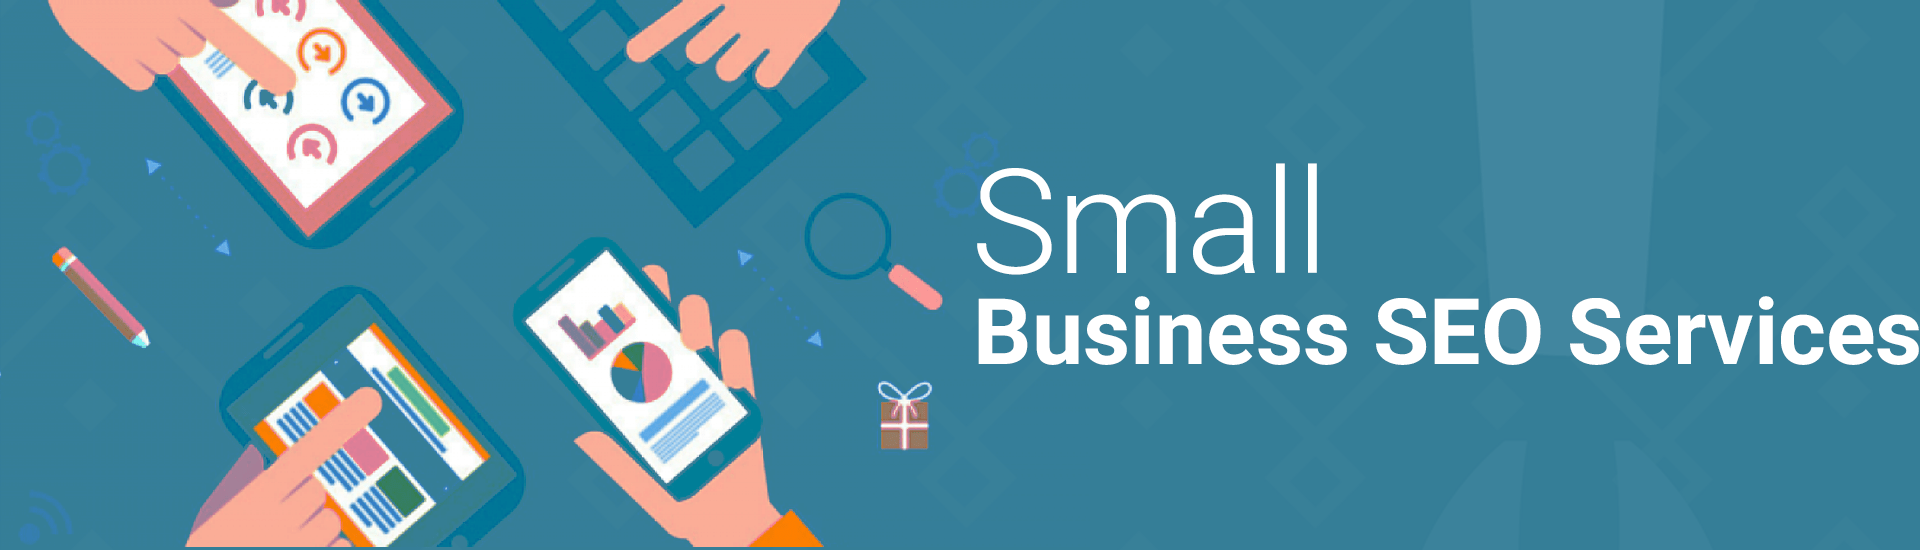 SSmall Business SEO Services